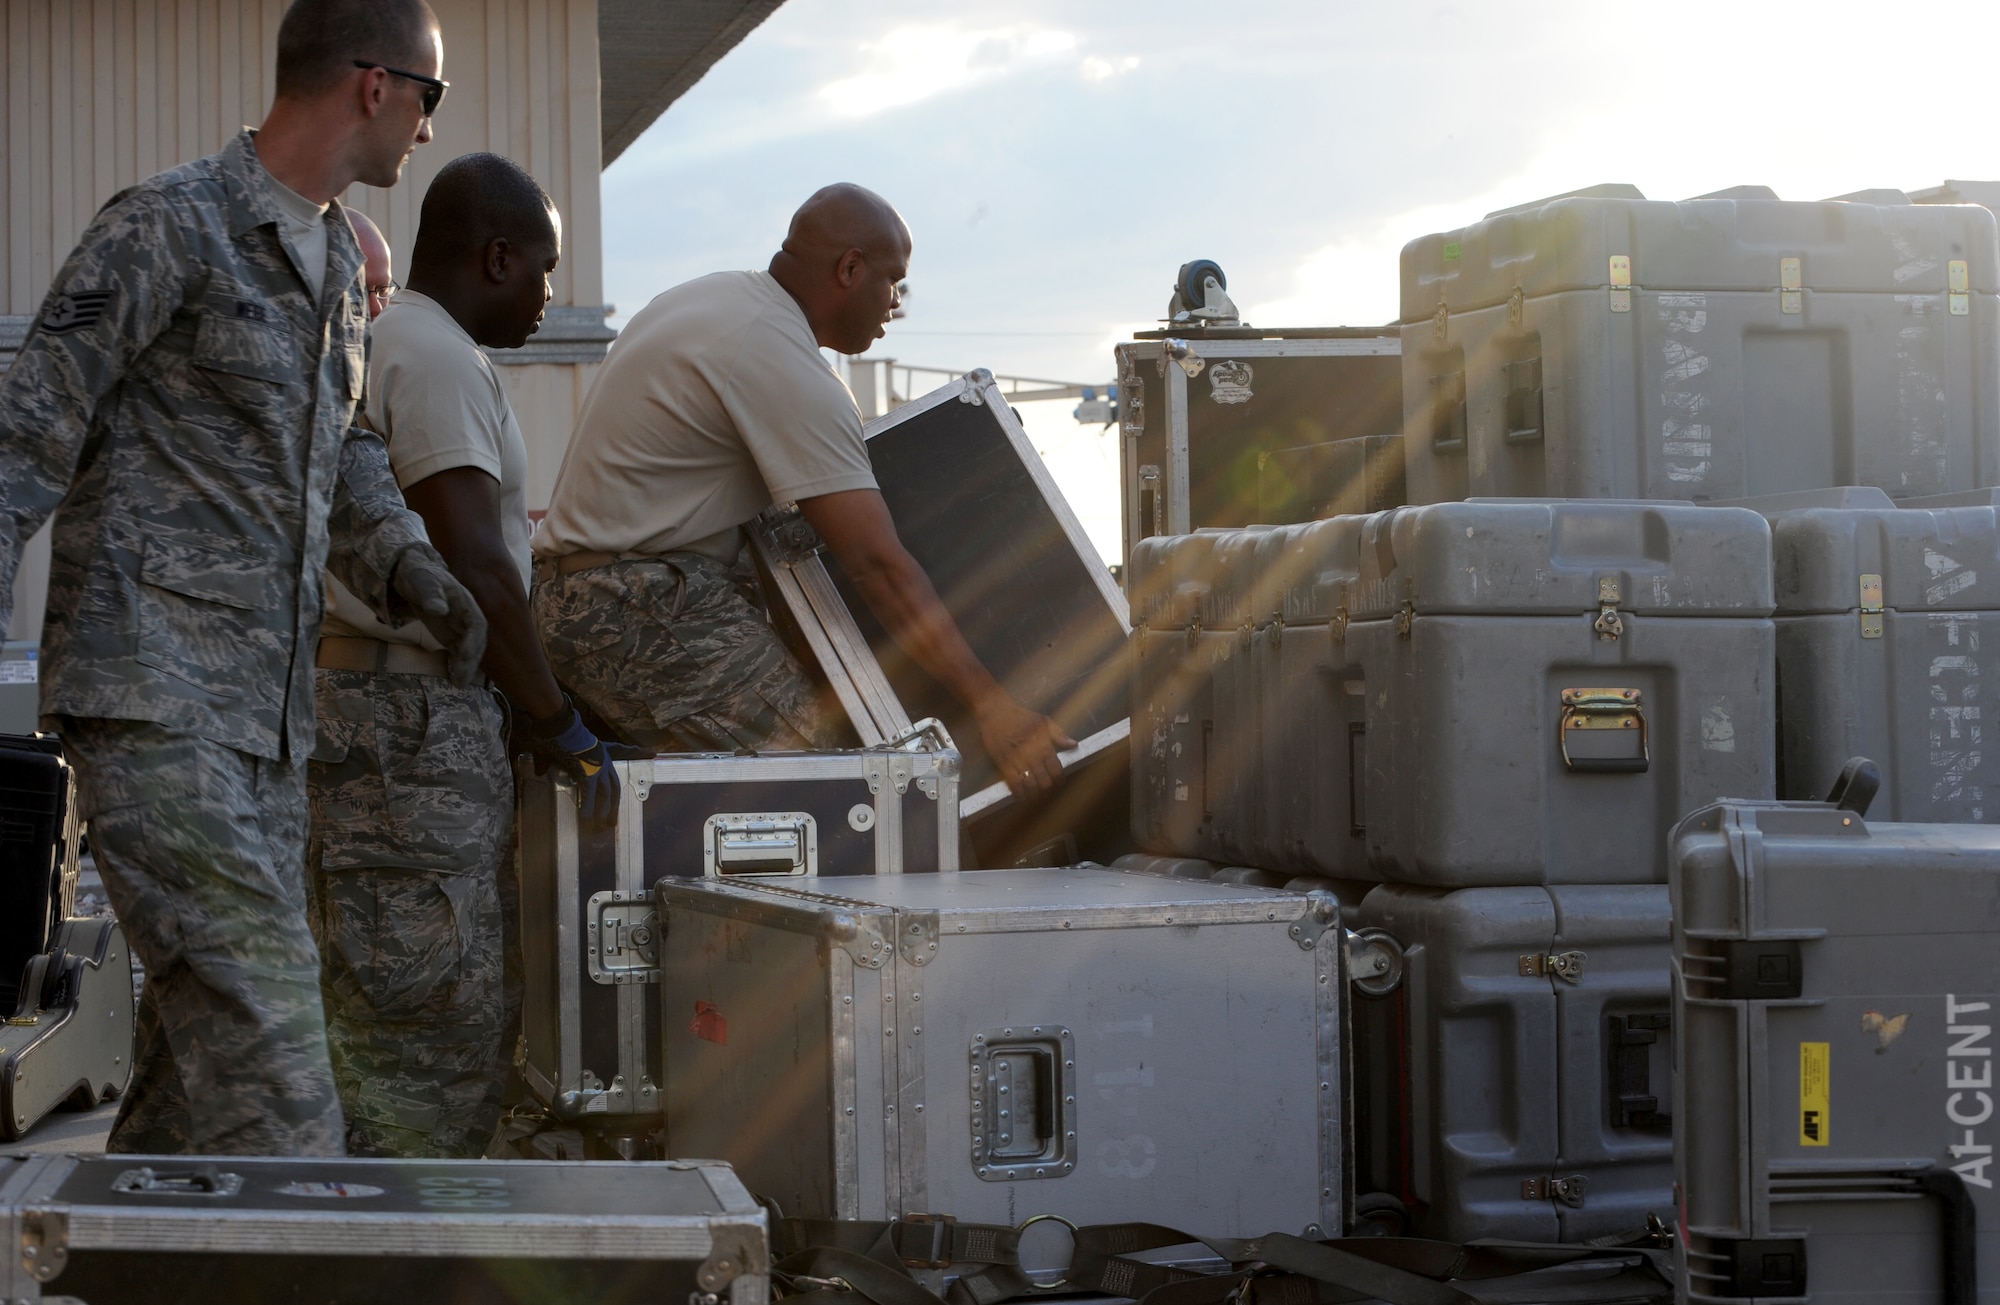 U.S. Air Forces Central Command band, Full Spectrum, builds a pallet prior to departing Transit Center at Manas, Kyrgyzstan, July 23, 2013. The 10-person band set up and tore down their own equipment, weighing almost two tons. Full Spectrum is deployed from Joint Base Langley-Eustis, Va. (U.S. Air Force photo/Staff Sgt. Krystie Martinez)